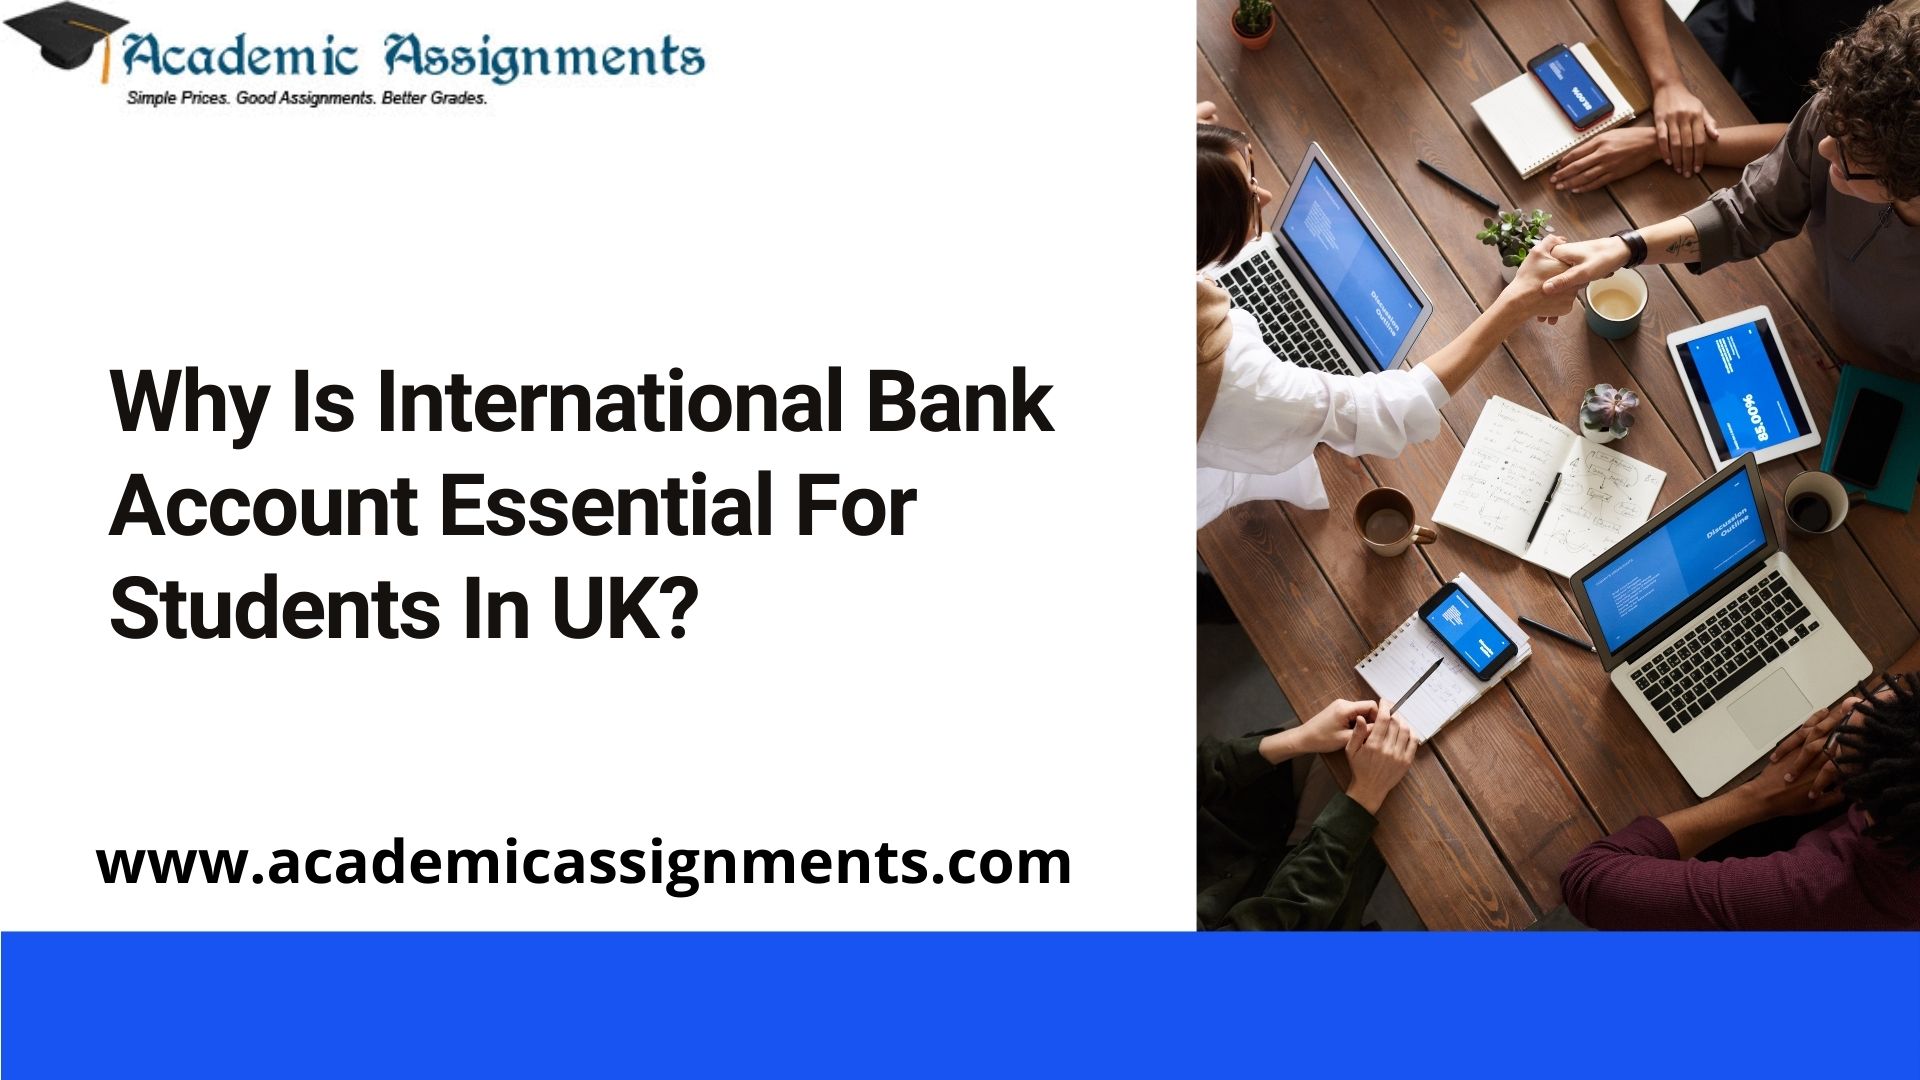 Why Is International Bank Account Essential For Students In UK